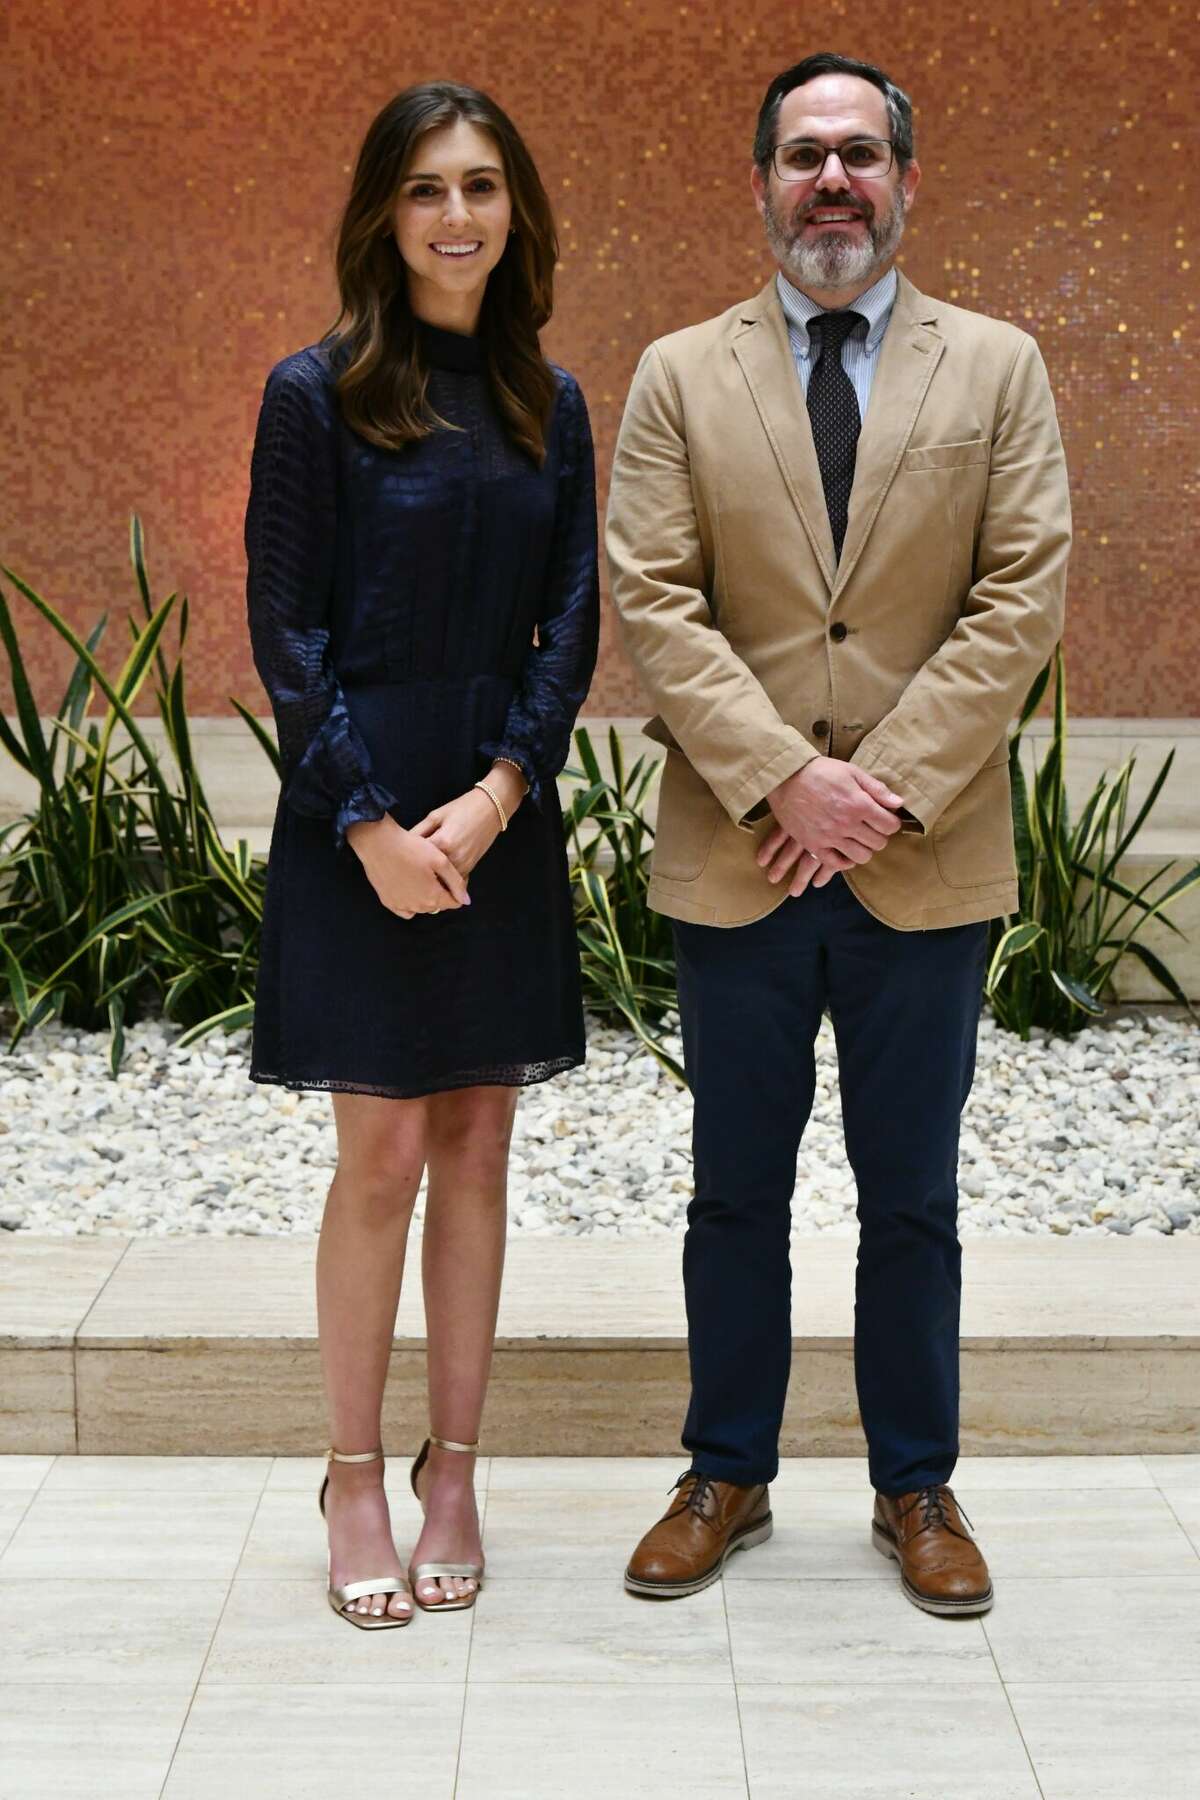 Joe Lindemood, President of Exchange Club of Midland, and Midland High School outstanding student, Grace Ware during the annual Exchange Club of Midland Awards luncheon on April 24, 2023 at the Petroleum Club. 